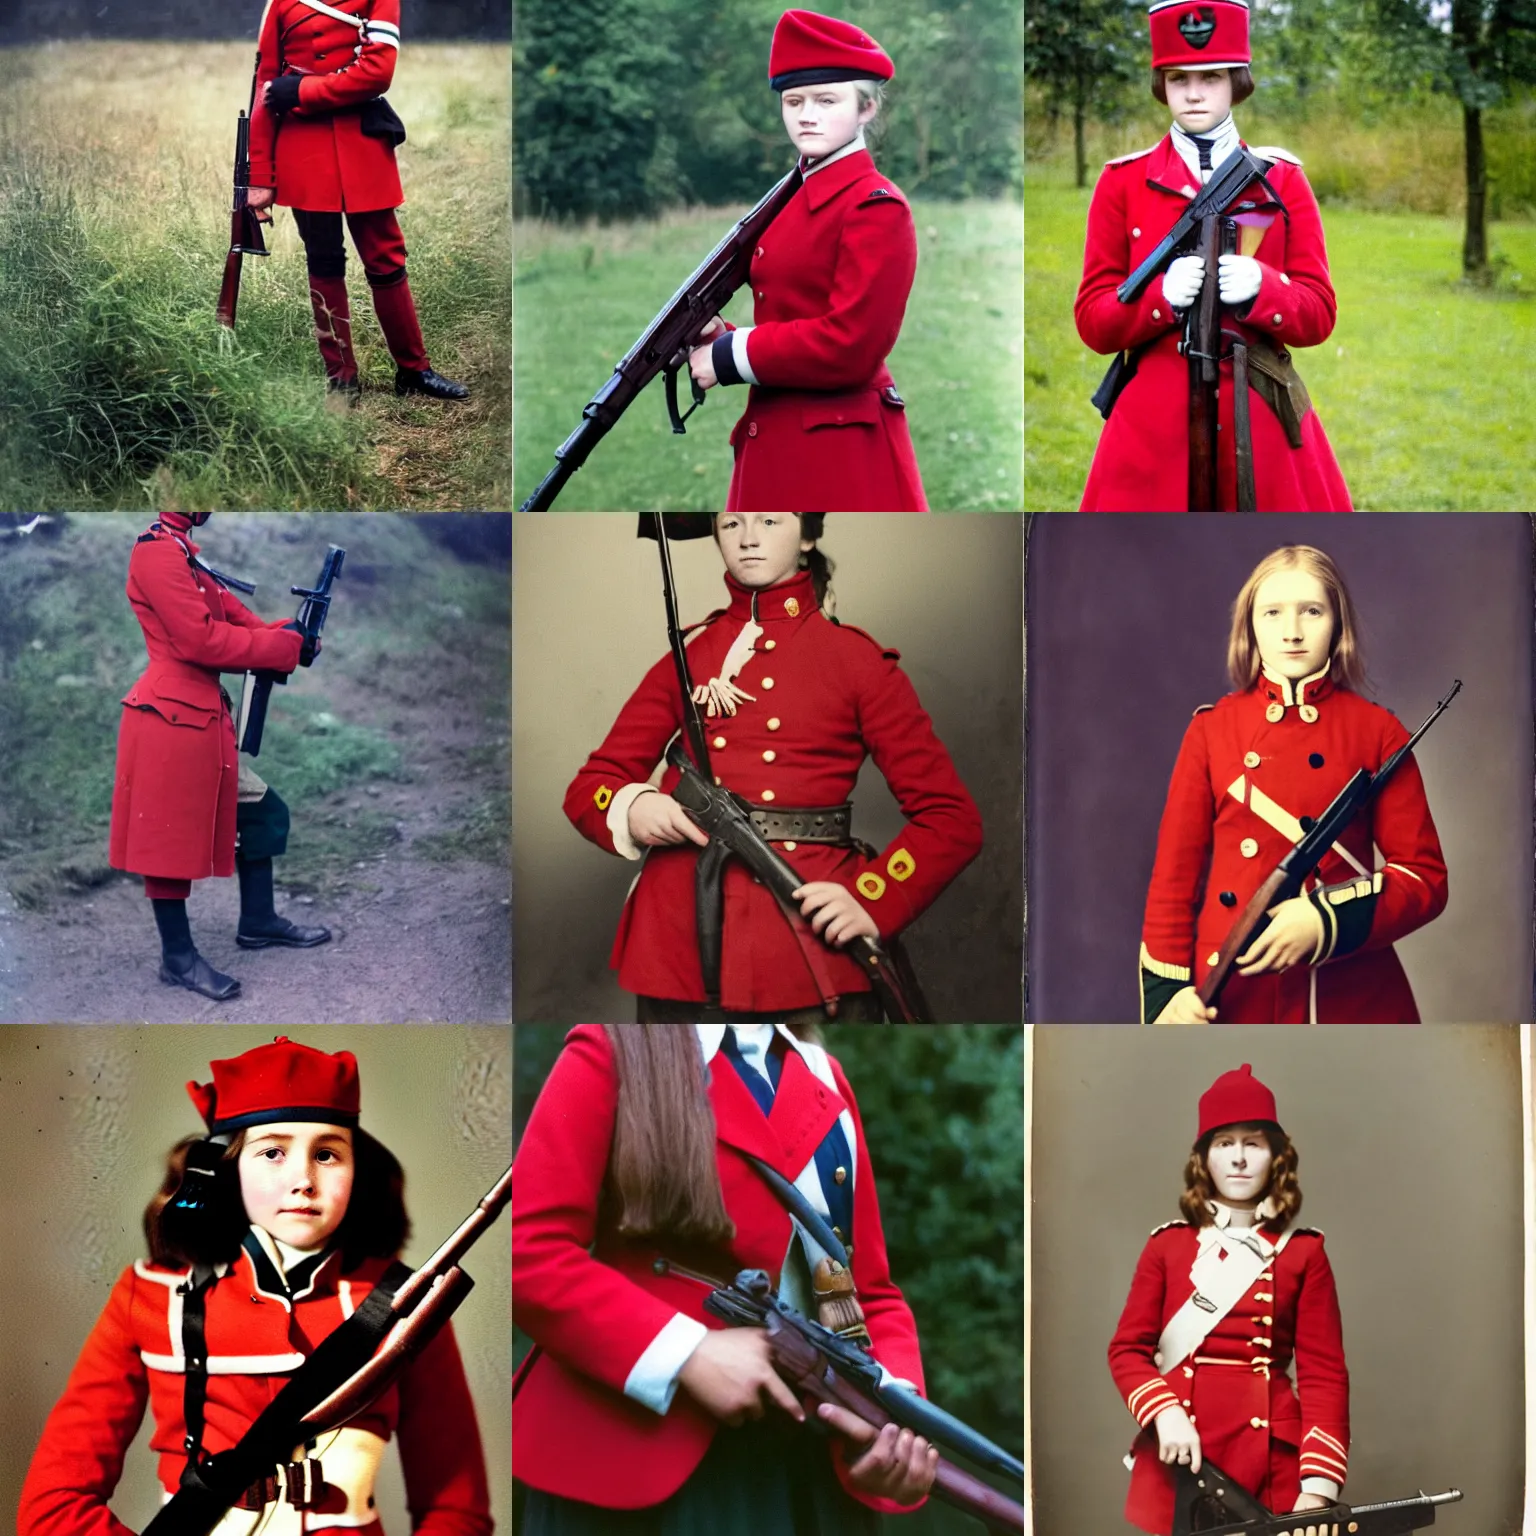 Prompt: A high quality colour photo of a teenage female British Redcoat soldier, holding a rifle